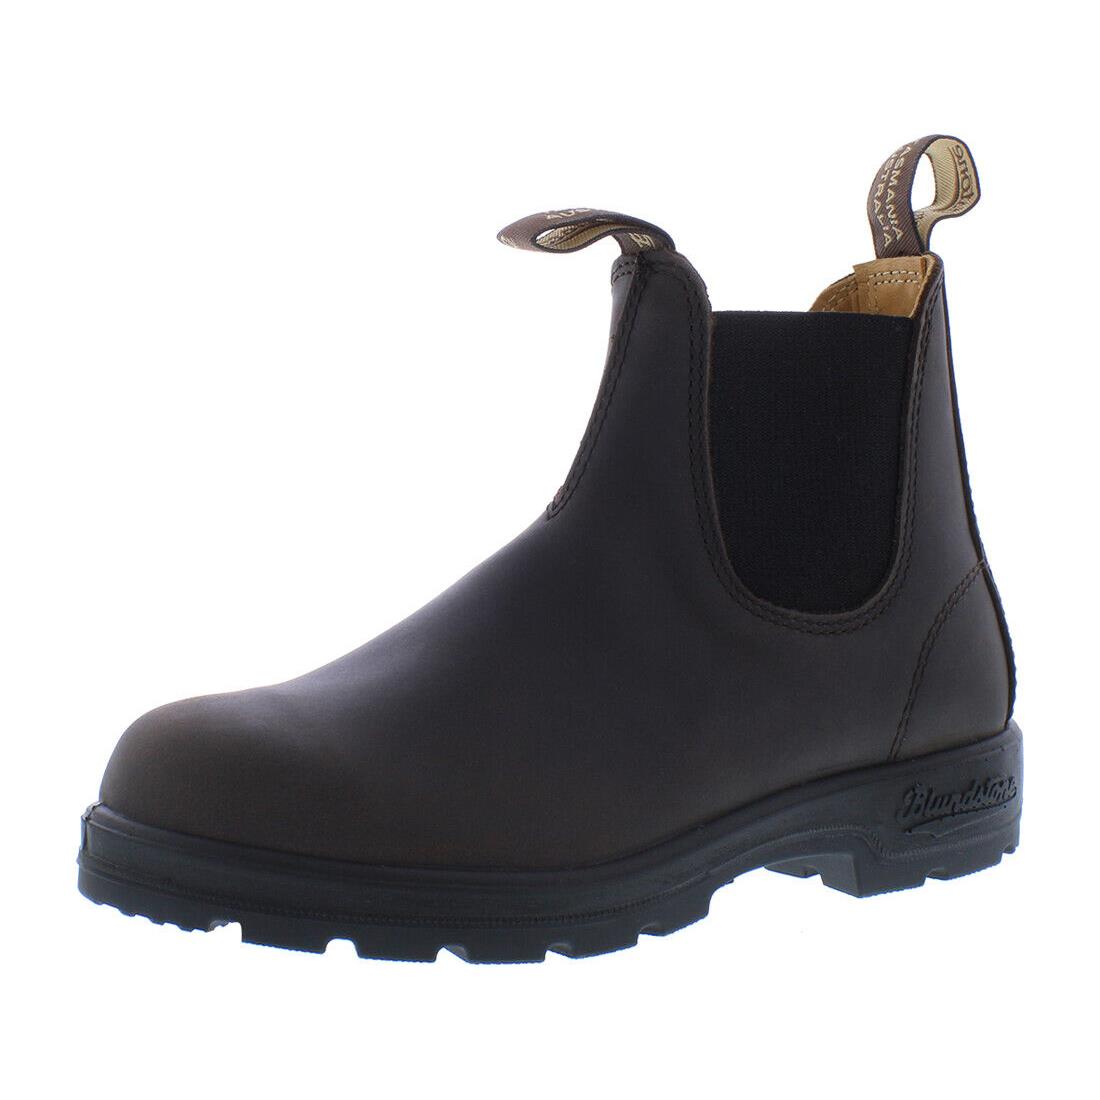 Blundstone 2340 Elastic Sided Boot Lined Unisex Shoes